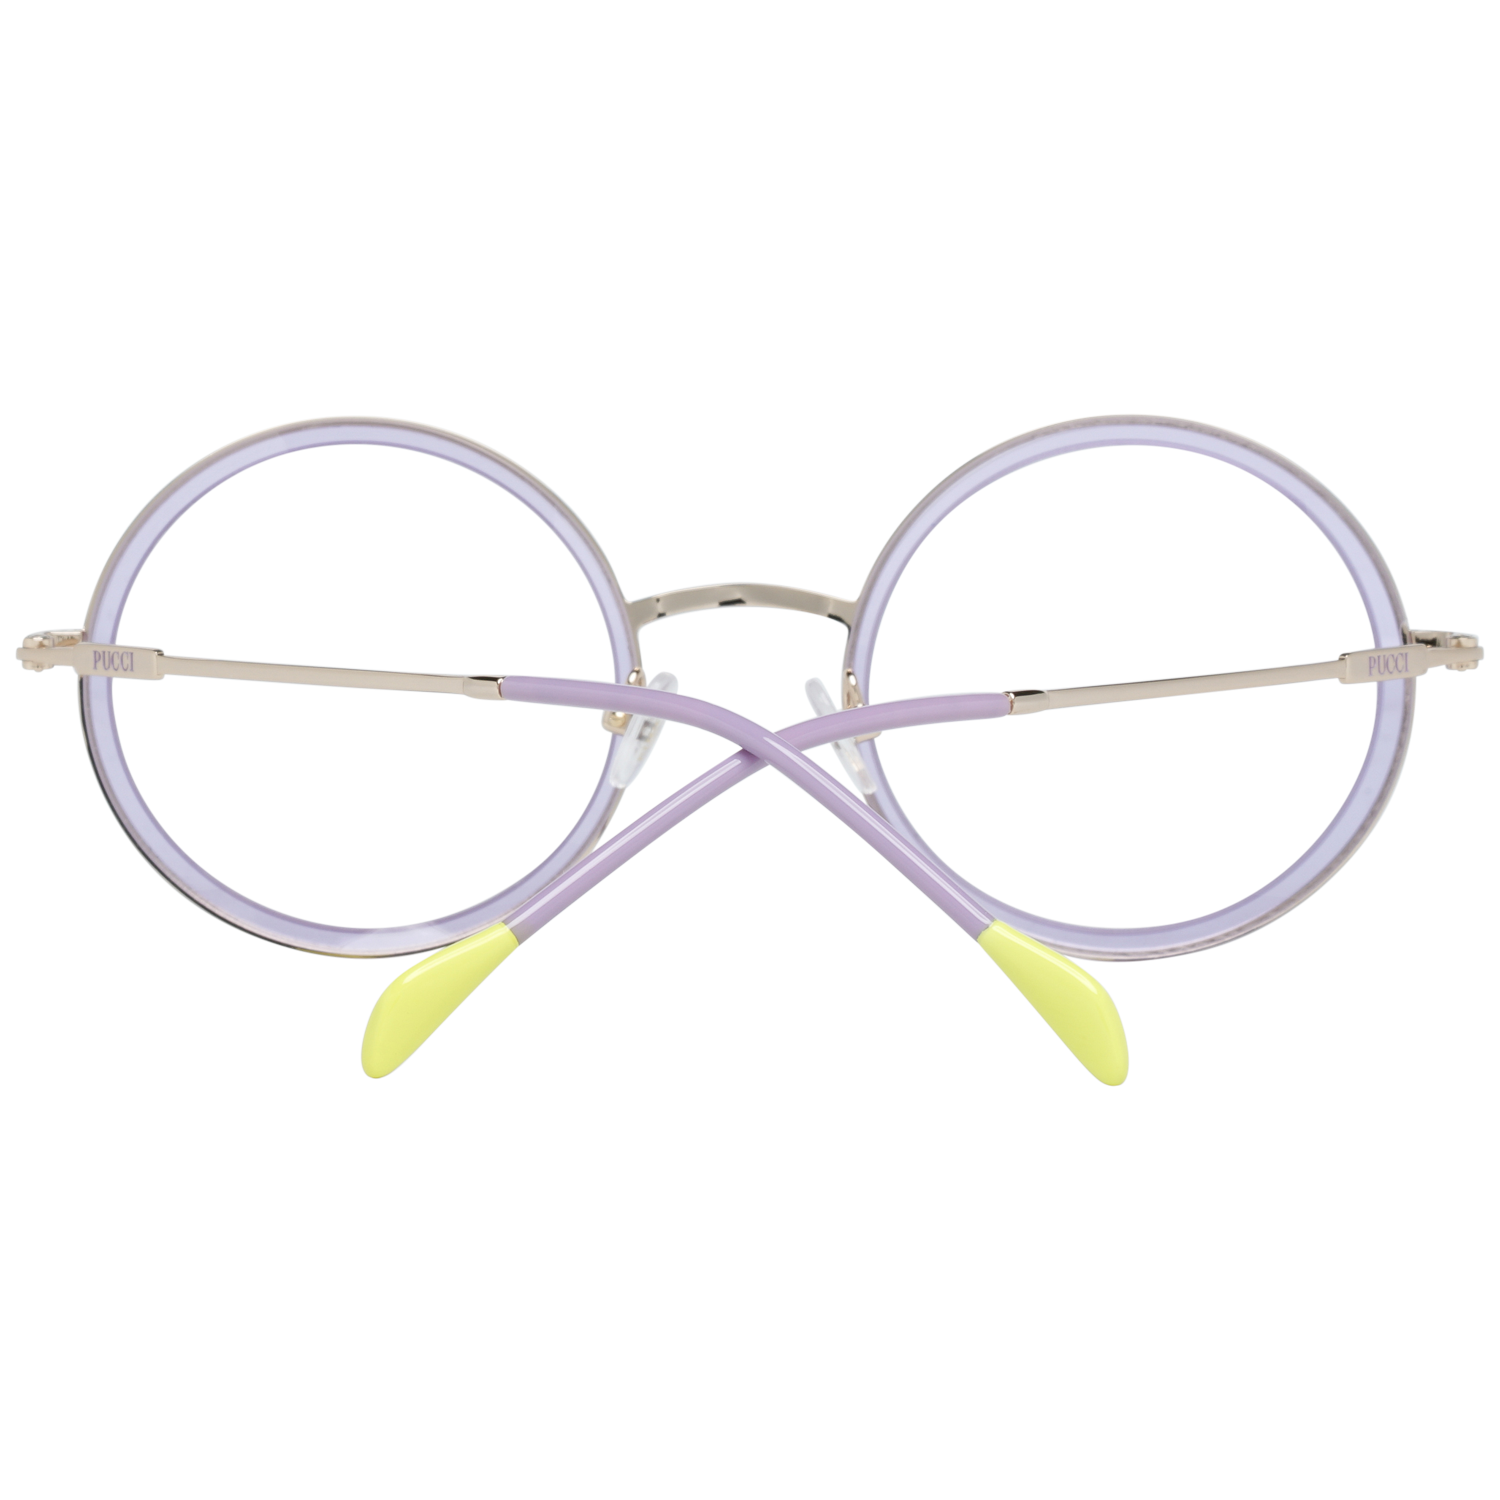 Emilio Pucci Optical Frame EP5113 080 49 Women
Frame color: Gold
Size: 49-23-140
Lenses width: 49
Lenses heigth: 48
Bridge length: 23
Frame width: 136
Temple length: 140
Shipment includes: Case, Cleaning cloth
Style: Full-Rim
Spring hinge: No